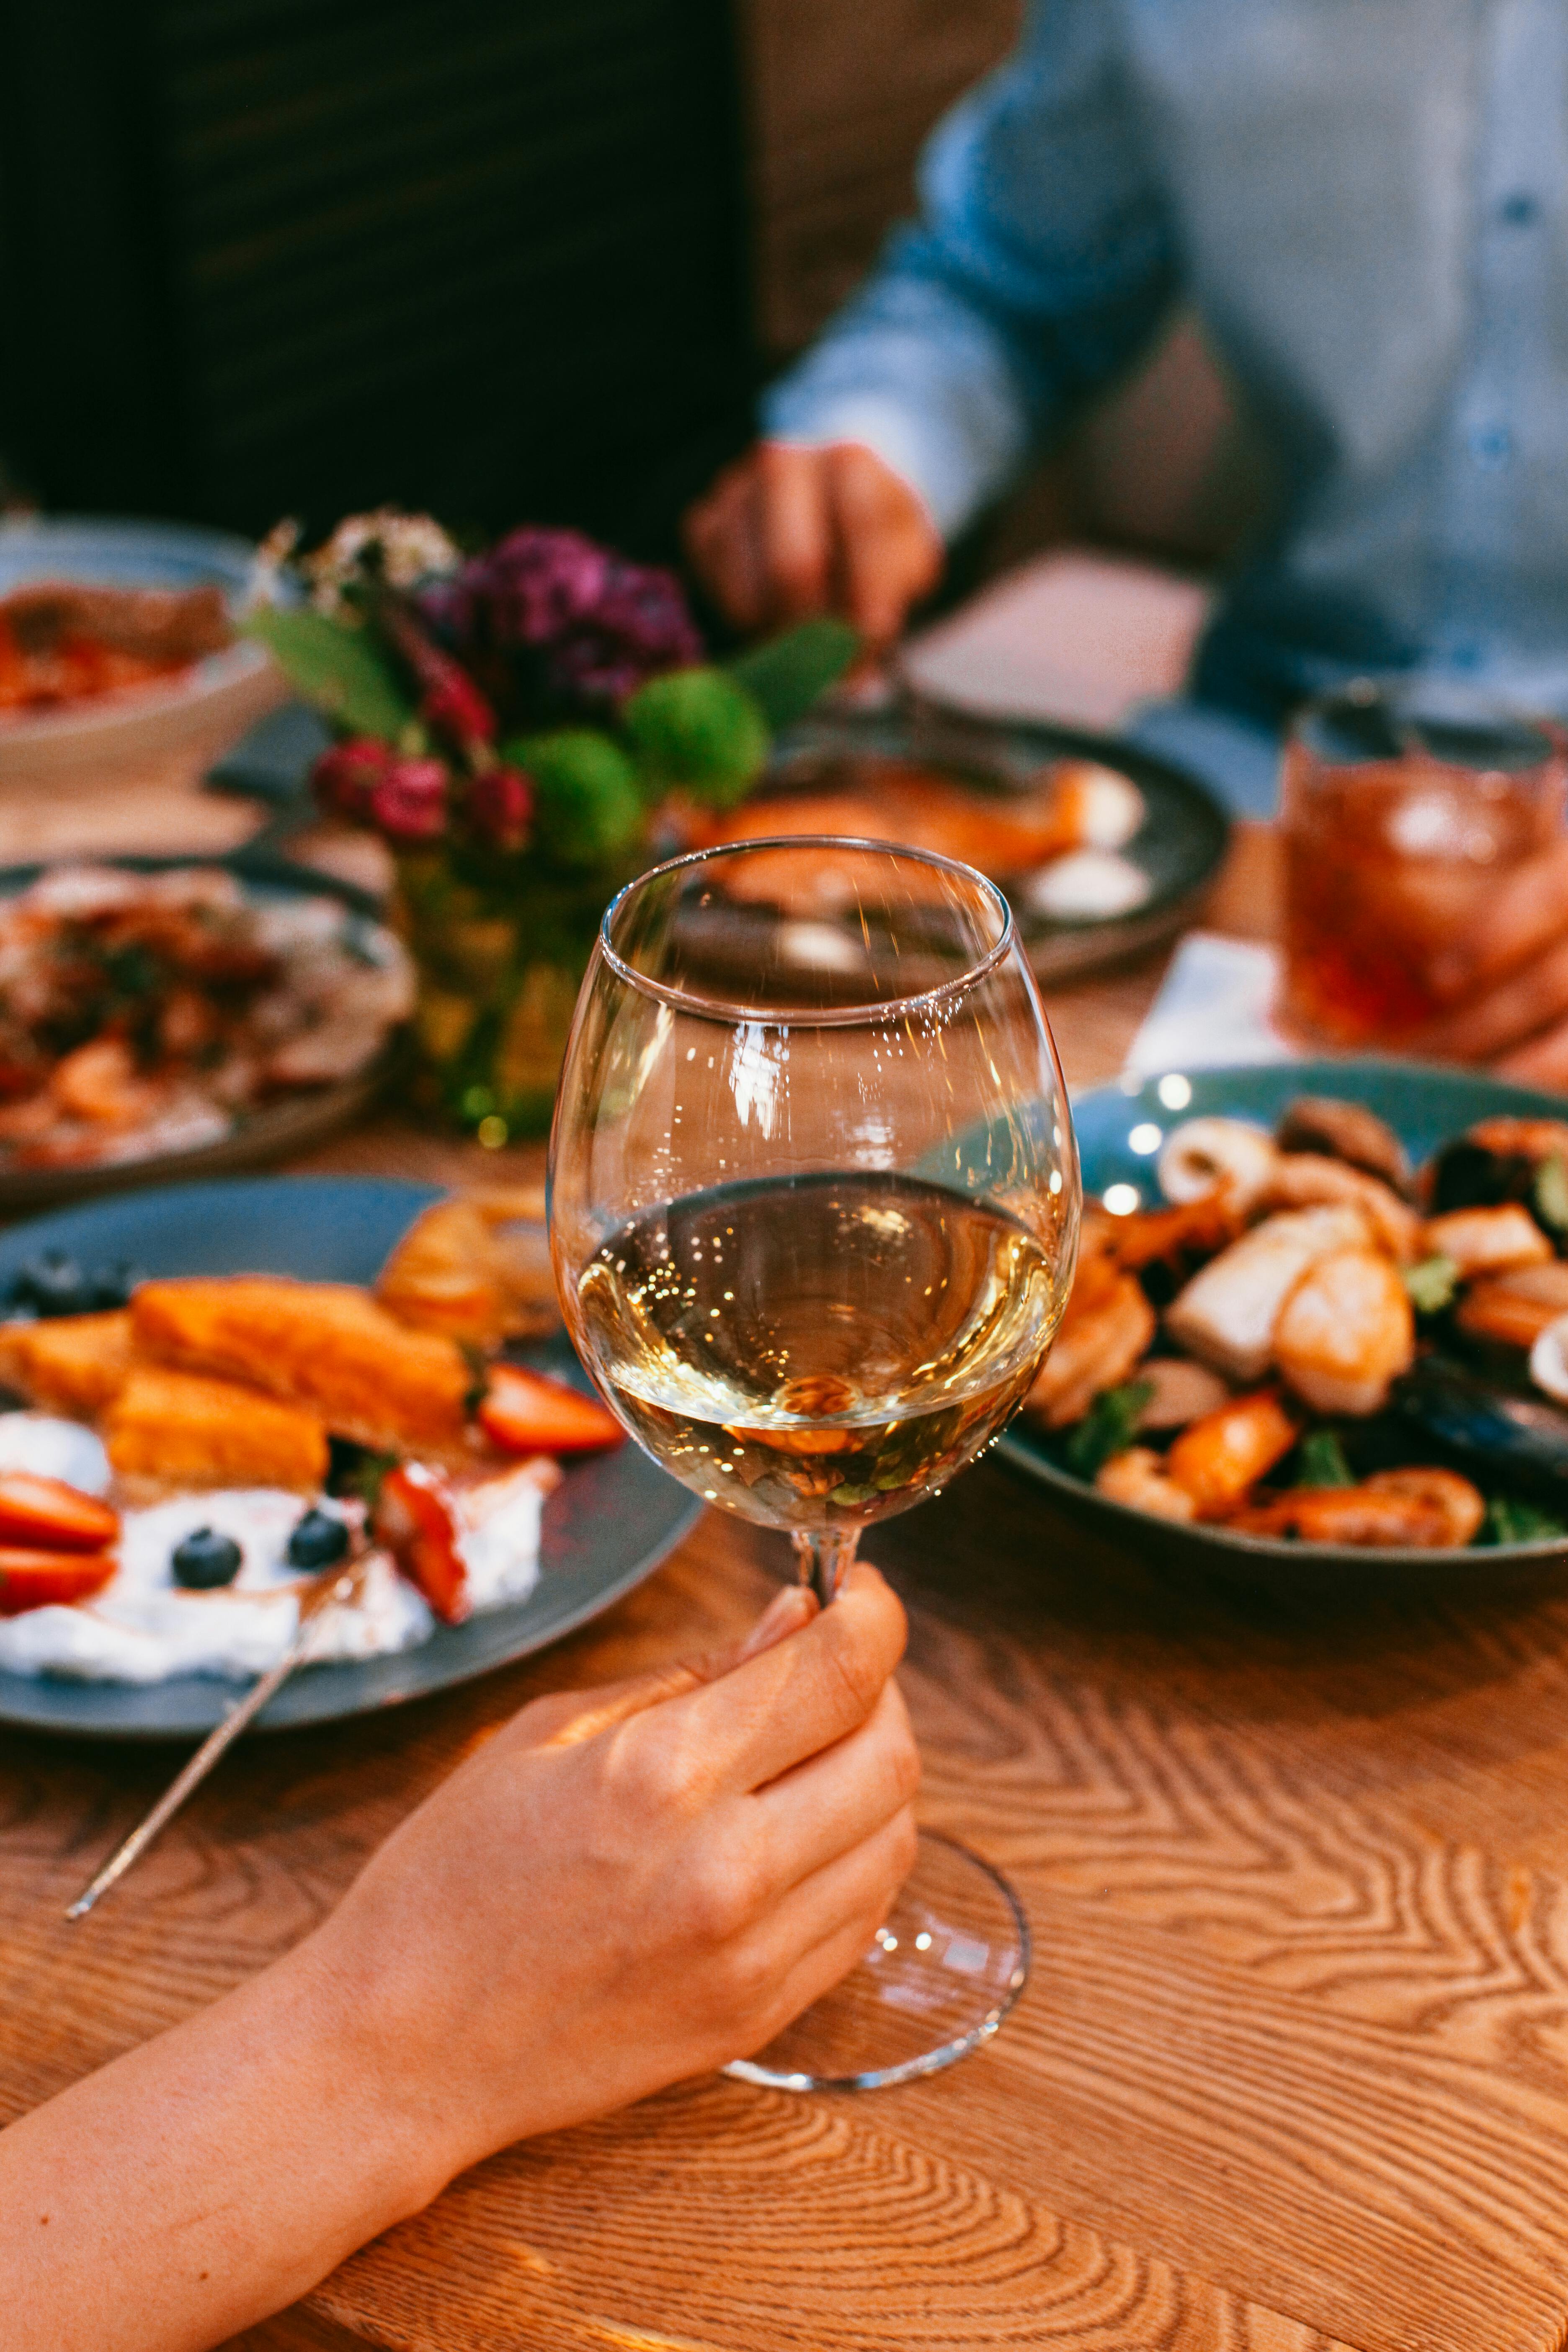 Someone holding a glass during a meal | Source: Pexels